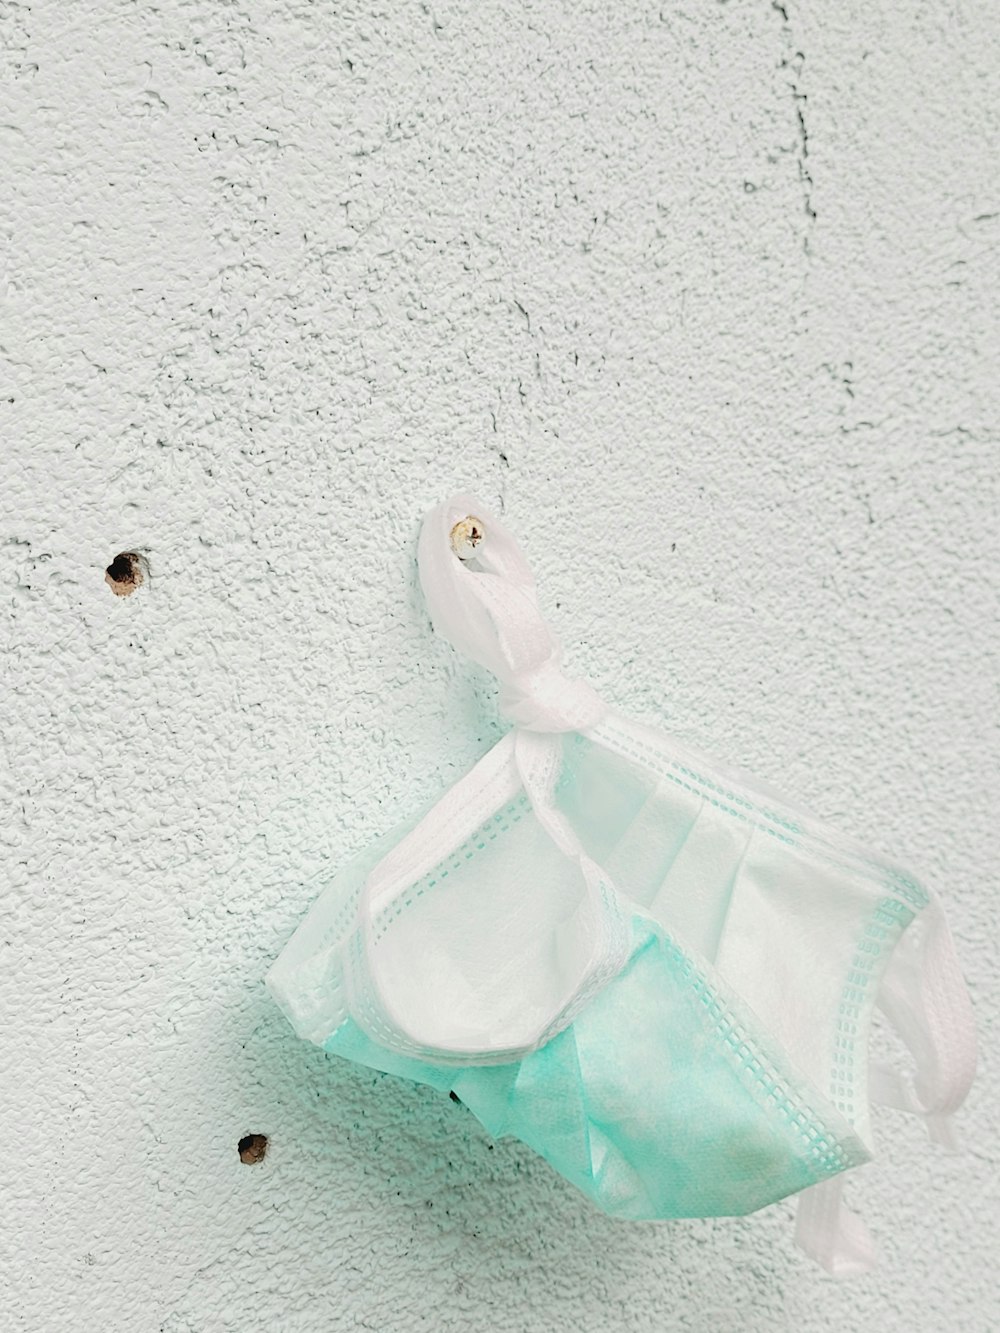 a bag hanging on a wall with a hole in it